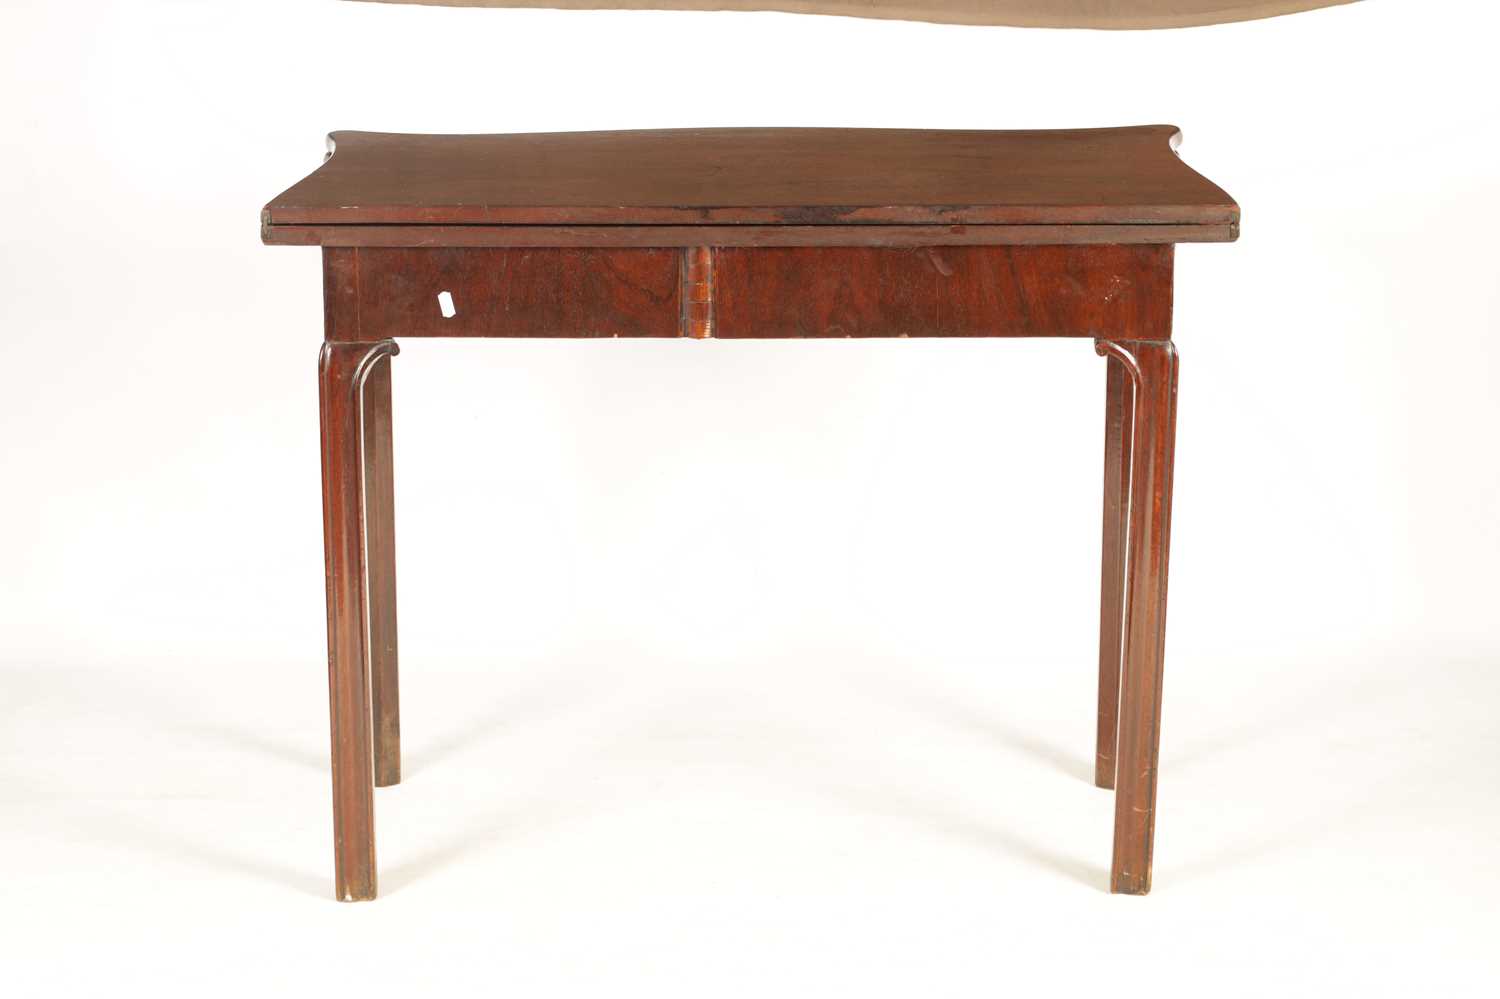 A GEORGE III MAHOGANY CHIPPENDALE STYLE SERPENTINE TEA TABLE - Image 3 of 8